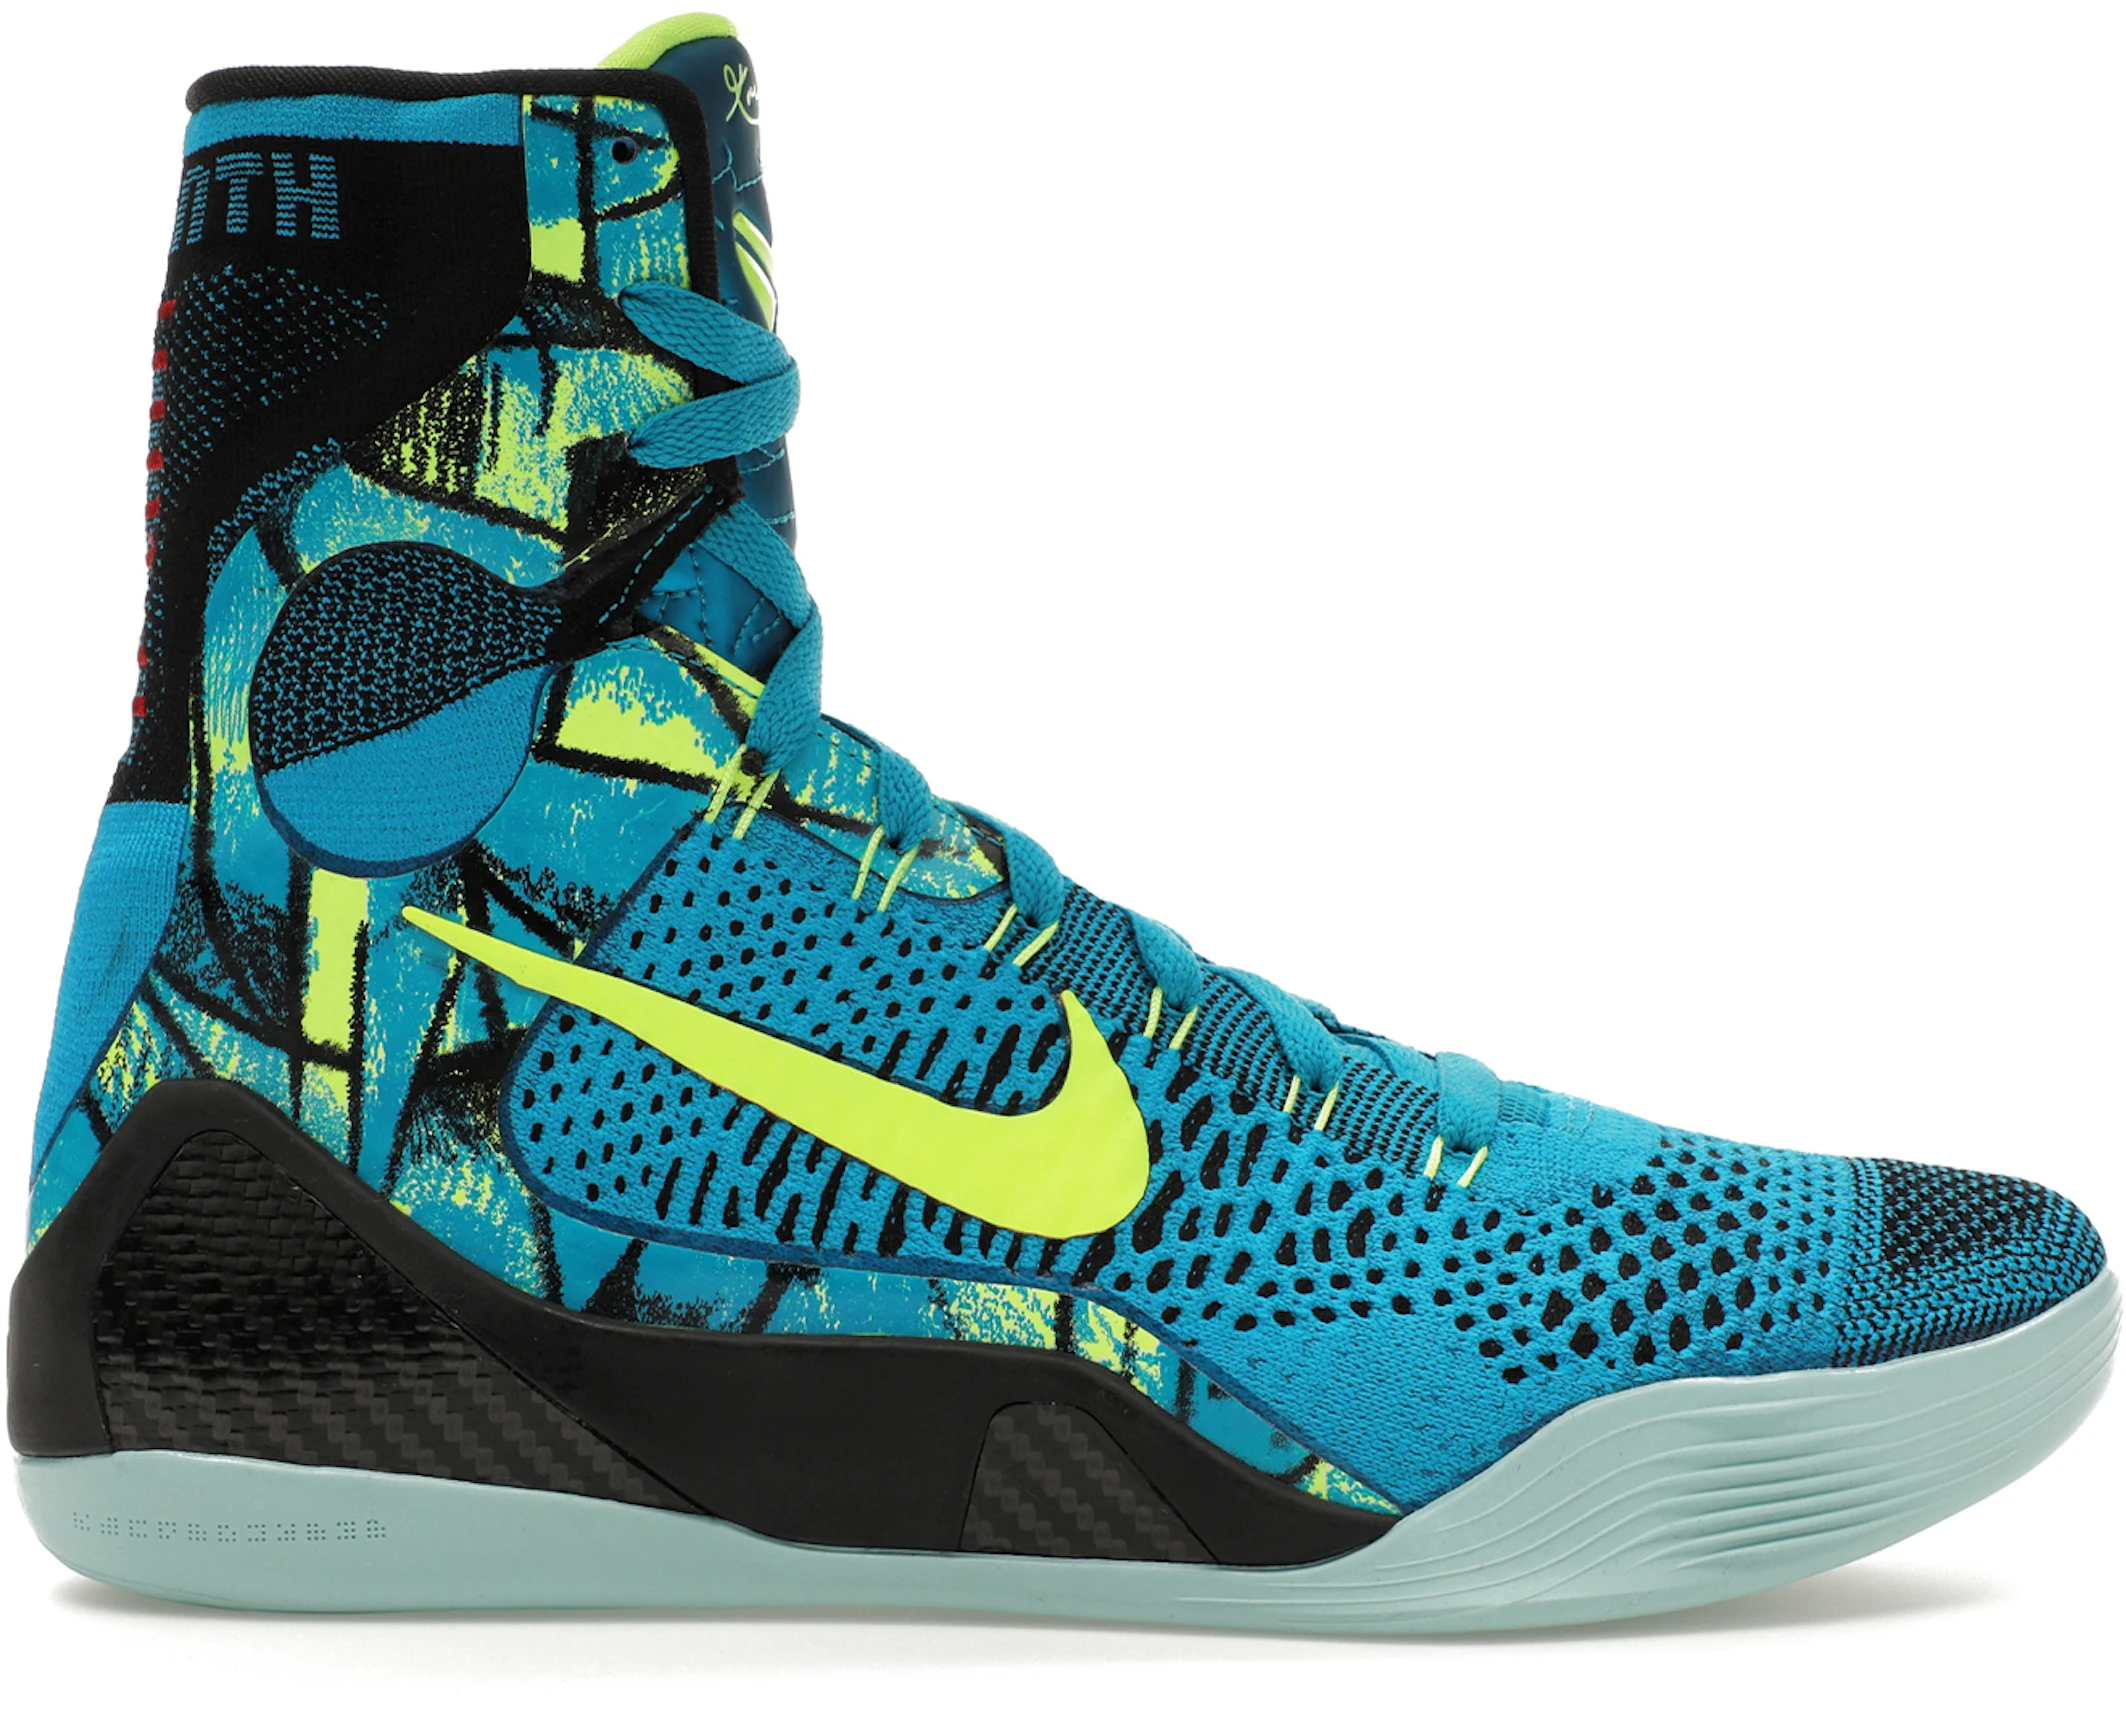 Anual conferencia cobre Buy Nike Kobe 9 Shoes & New Sneakers - StockX